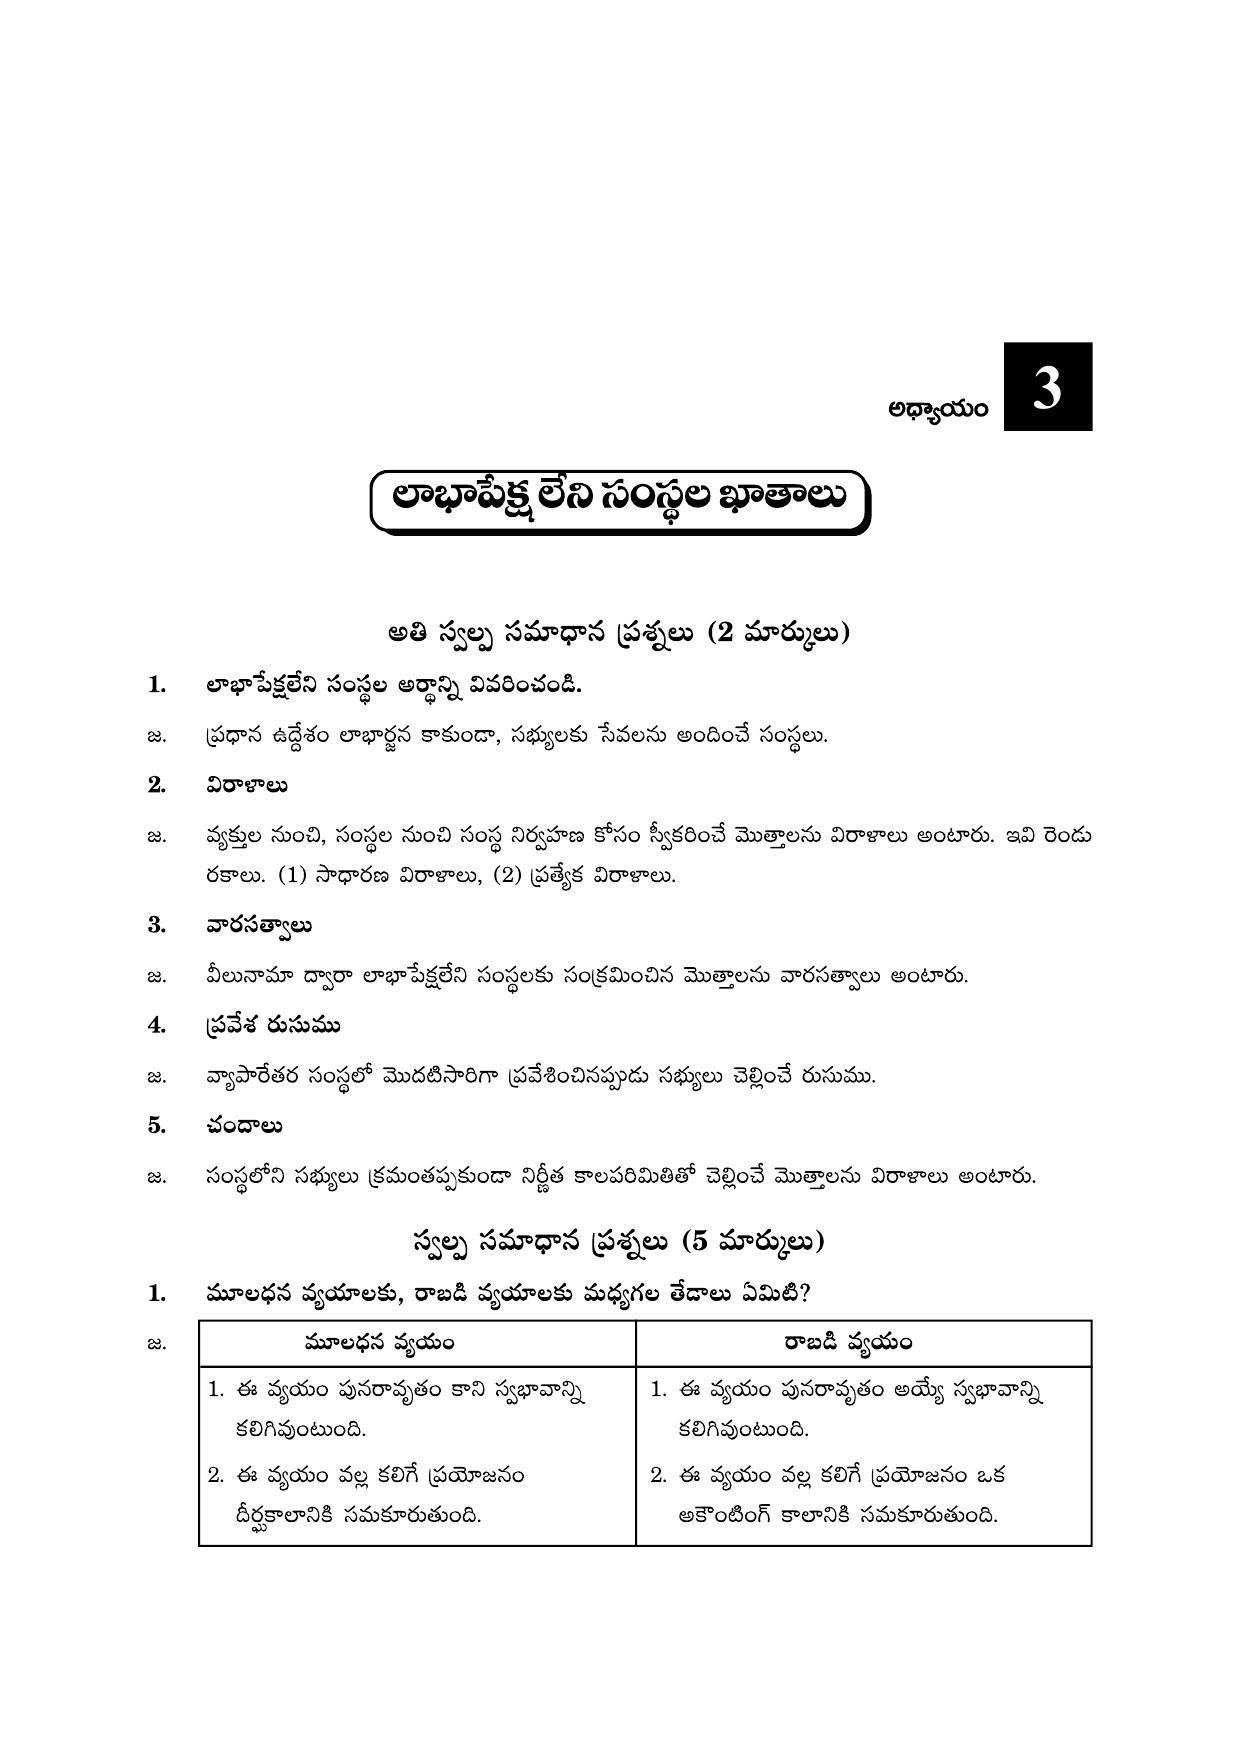 TS SCERT Inter 2nd Year Commerce &Accts II yr TM Path 1 (Telugu Medium) Text Book - Page 36